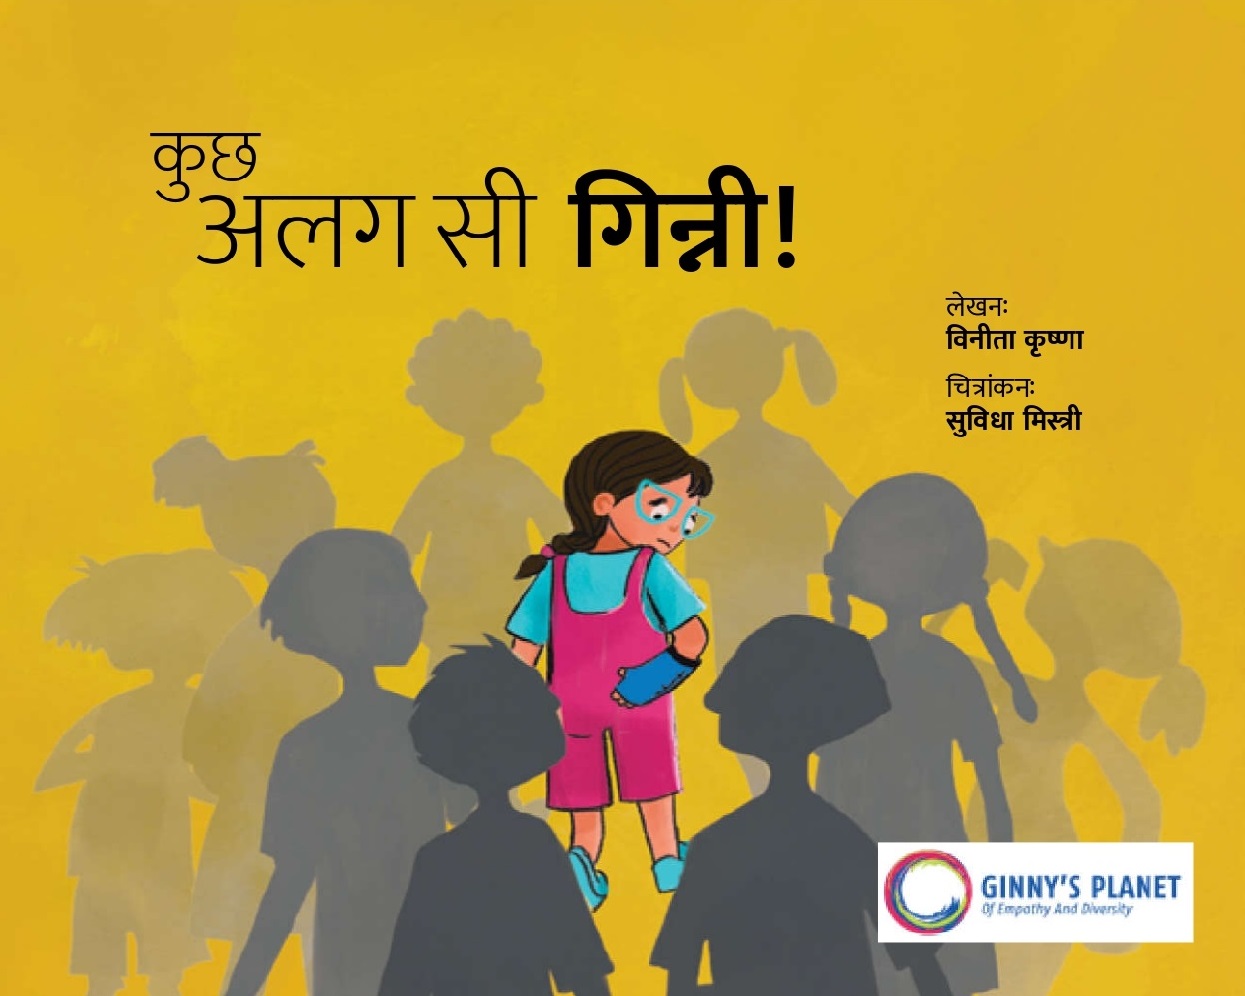 kuch alag si ginny- new story book of 8 yr old Ginny